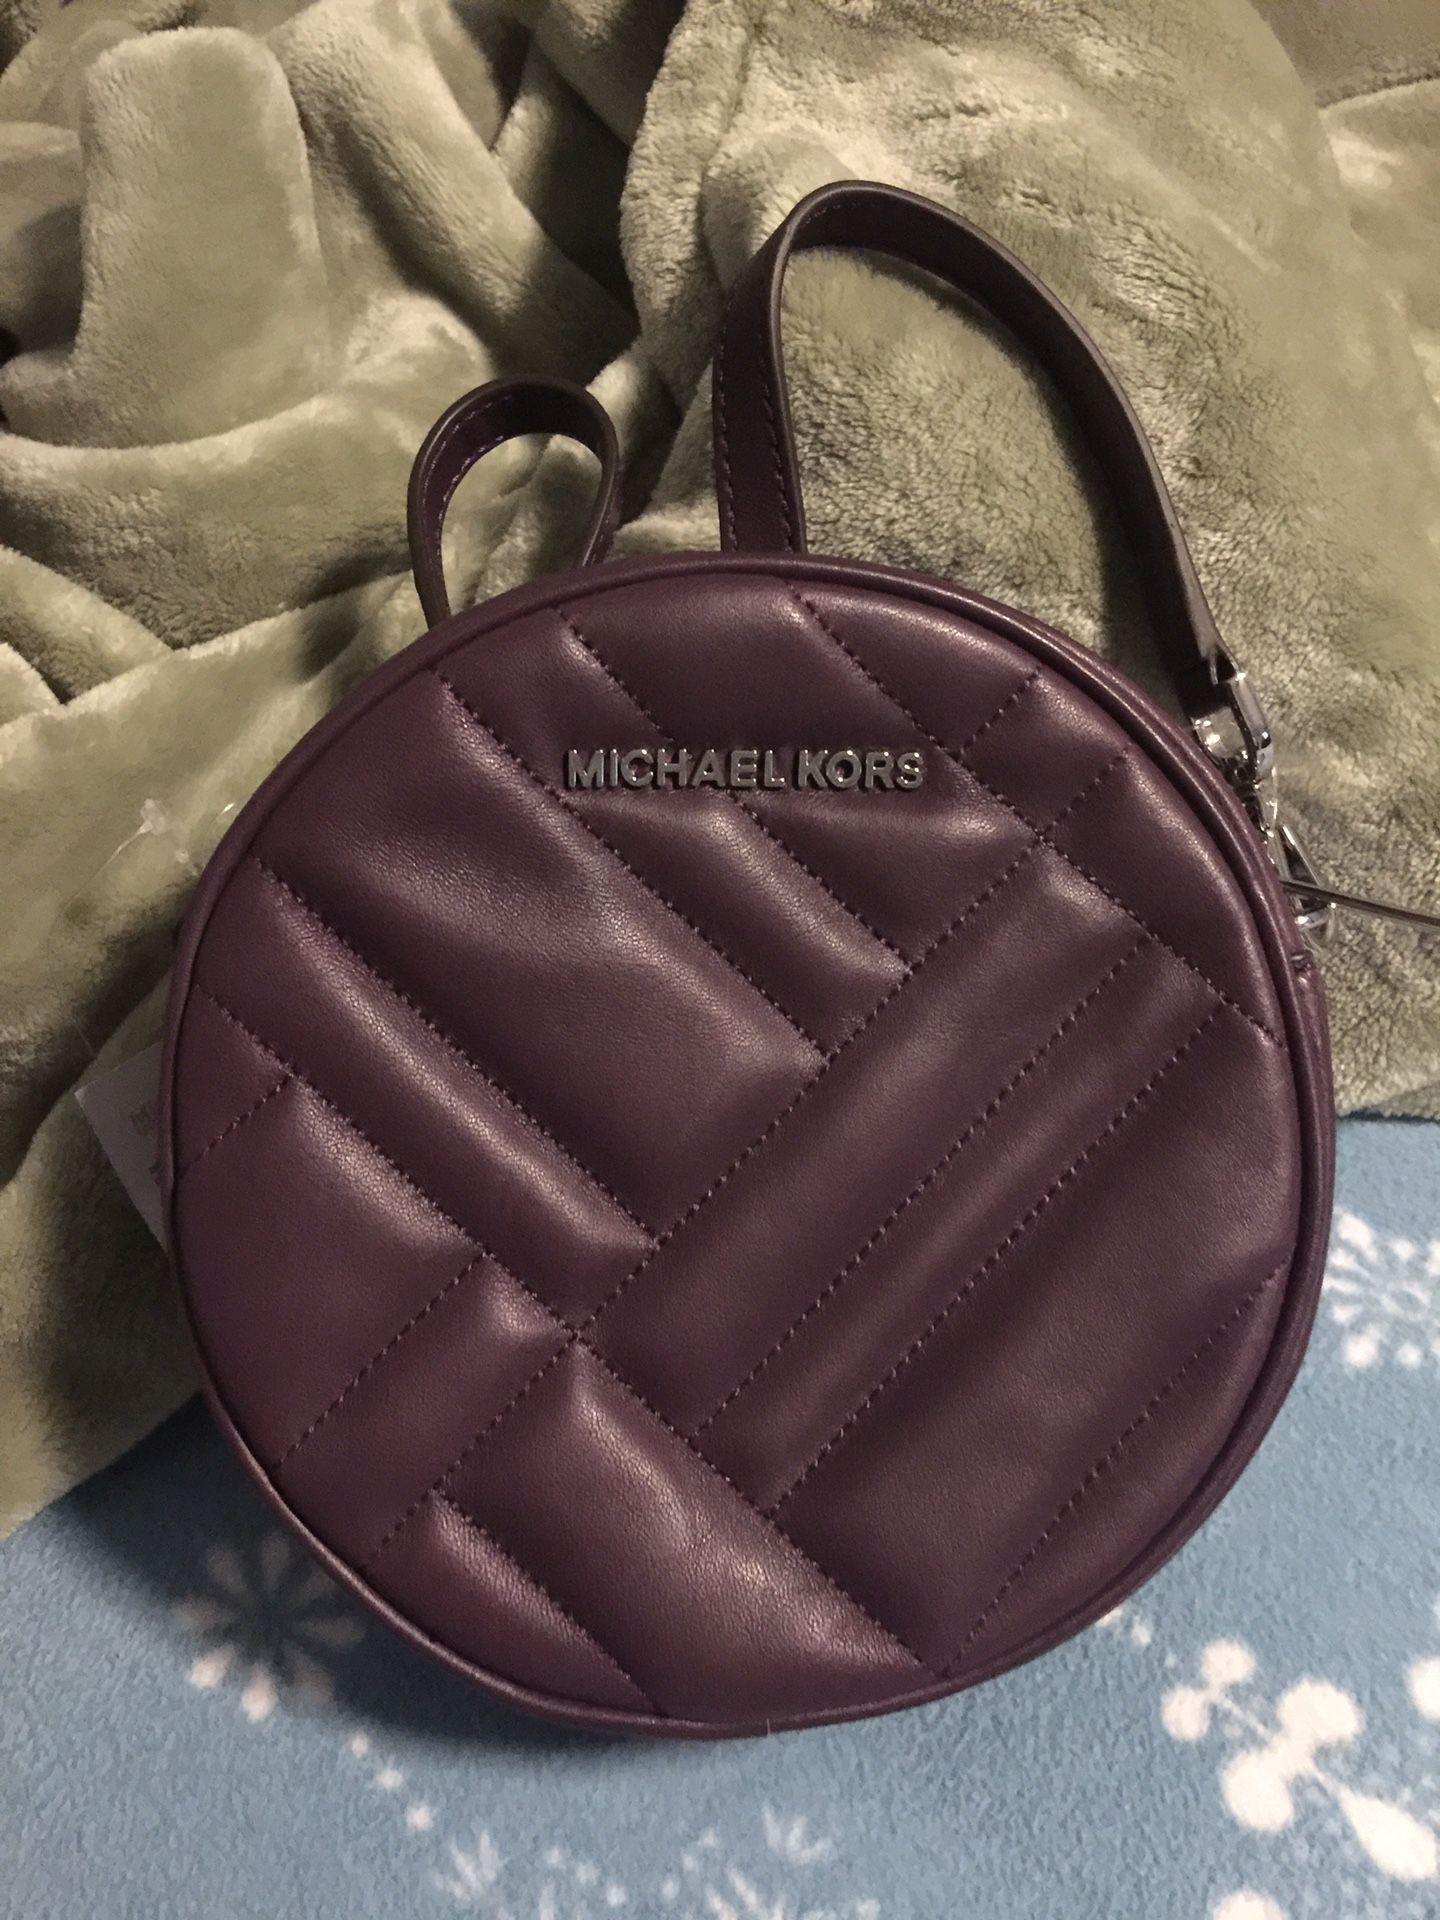 Authentic Michael Kors crossbody bags with tag. $100 Each obo. Pick up in Van Nuys